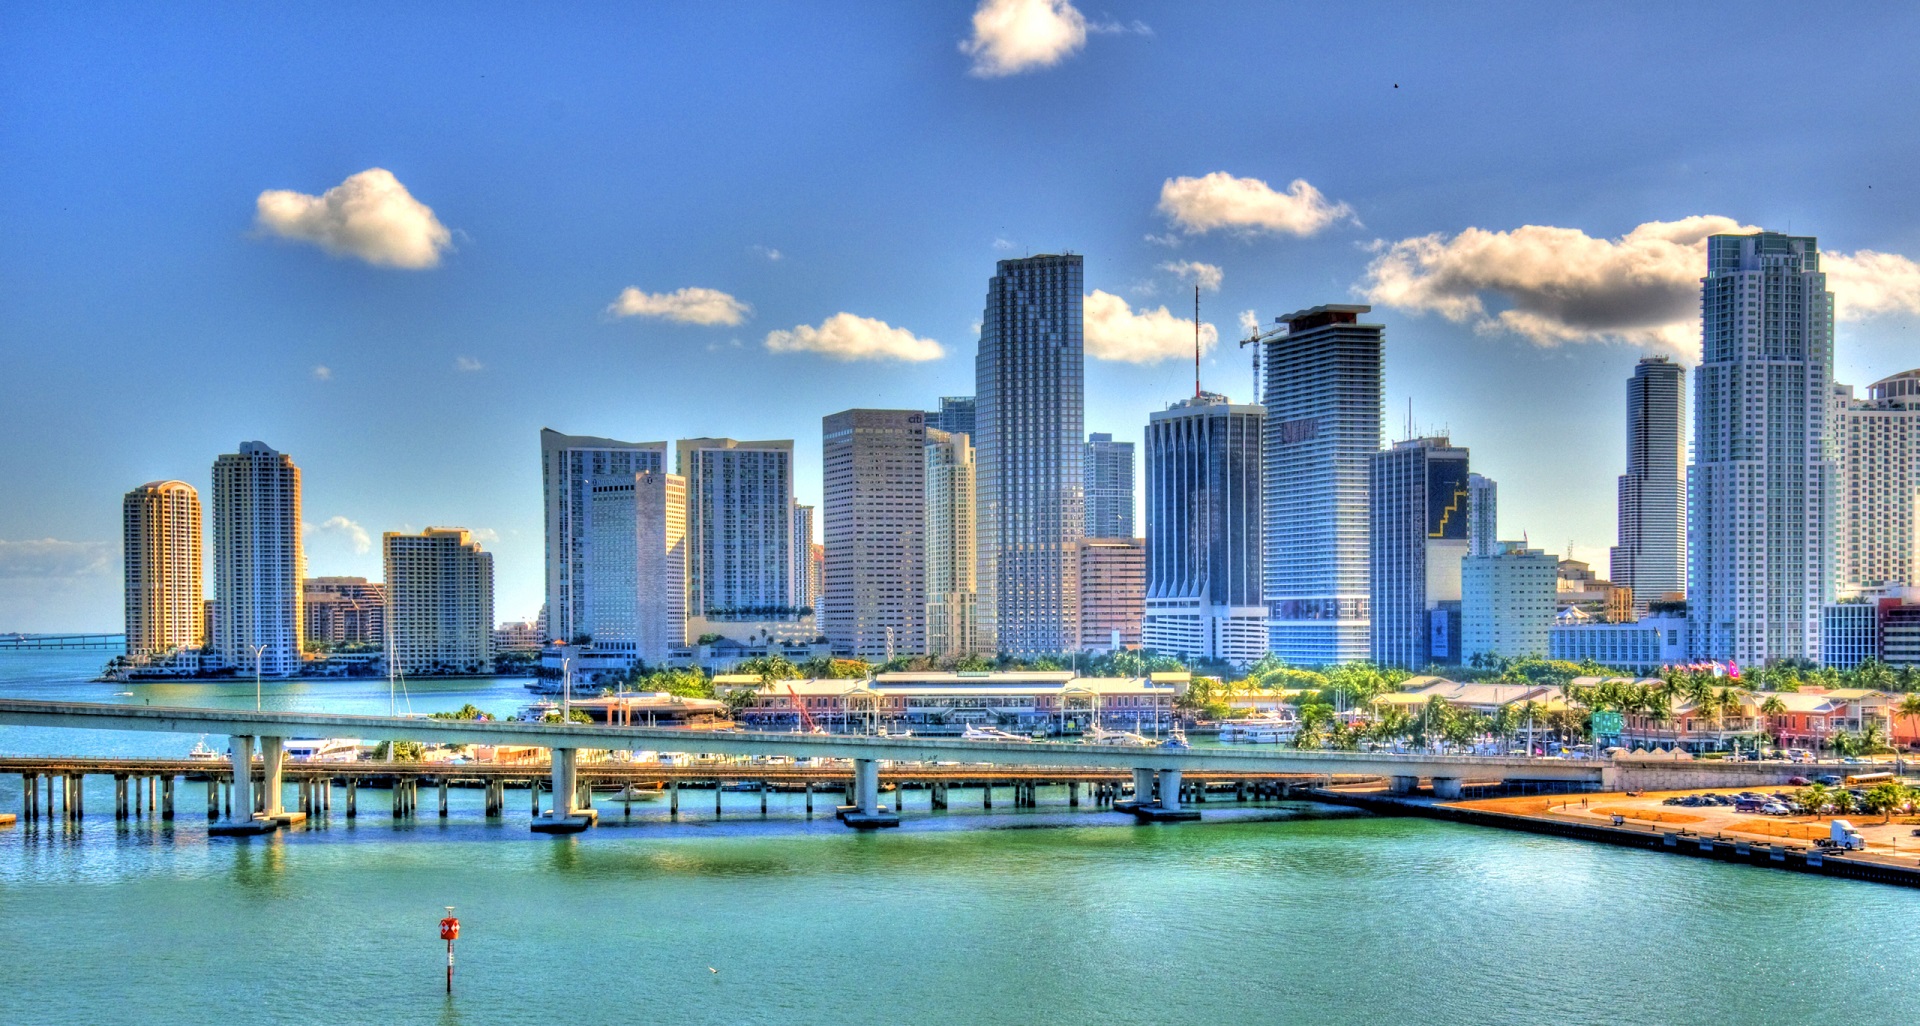 Moving to Miami, useful information and tips for relocating to Miami